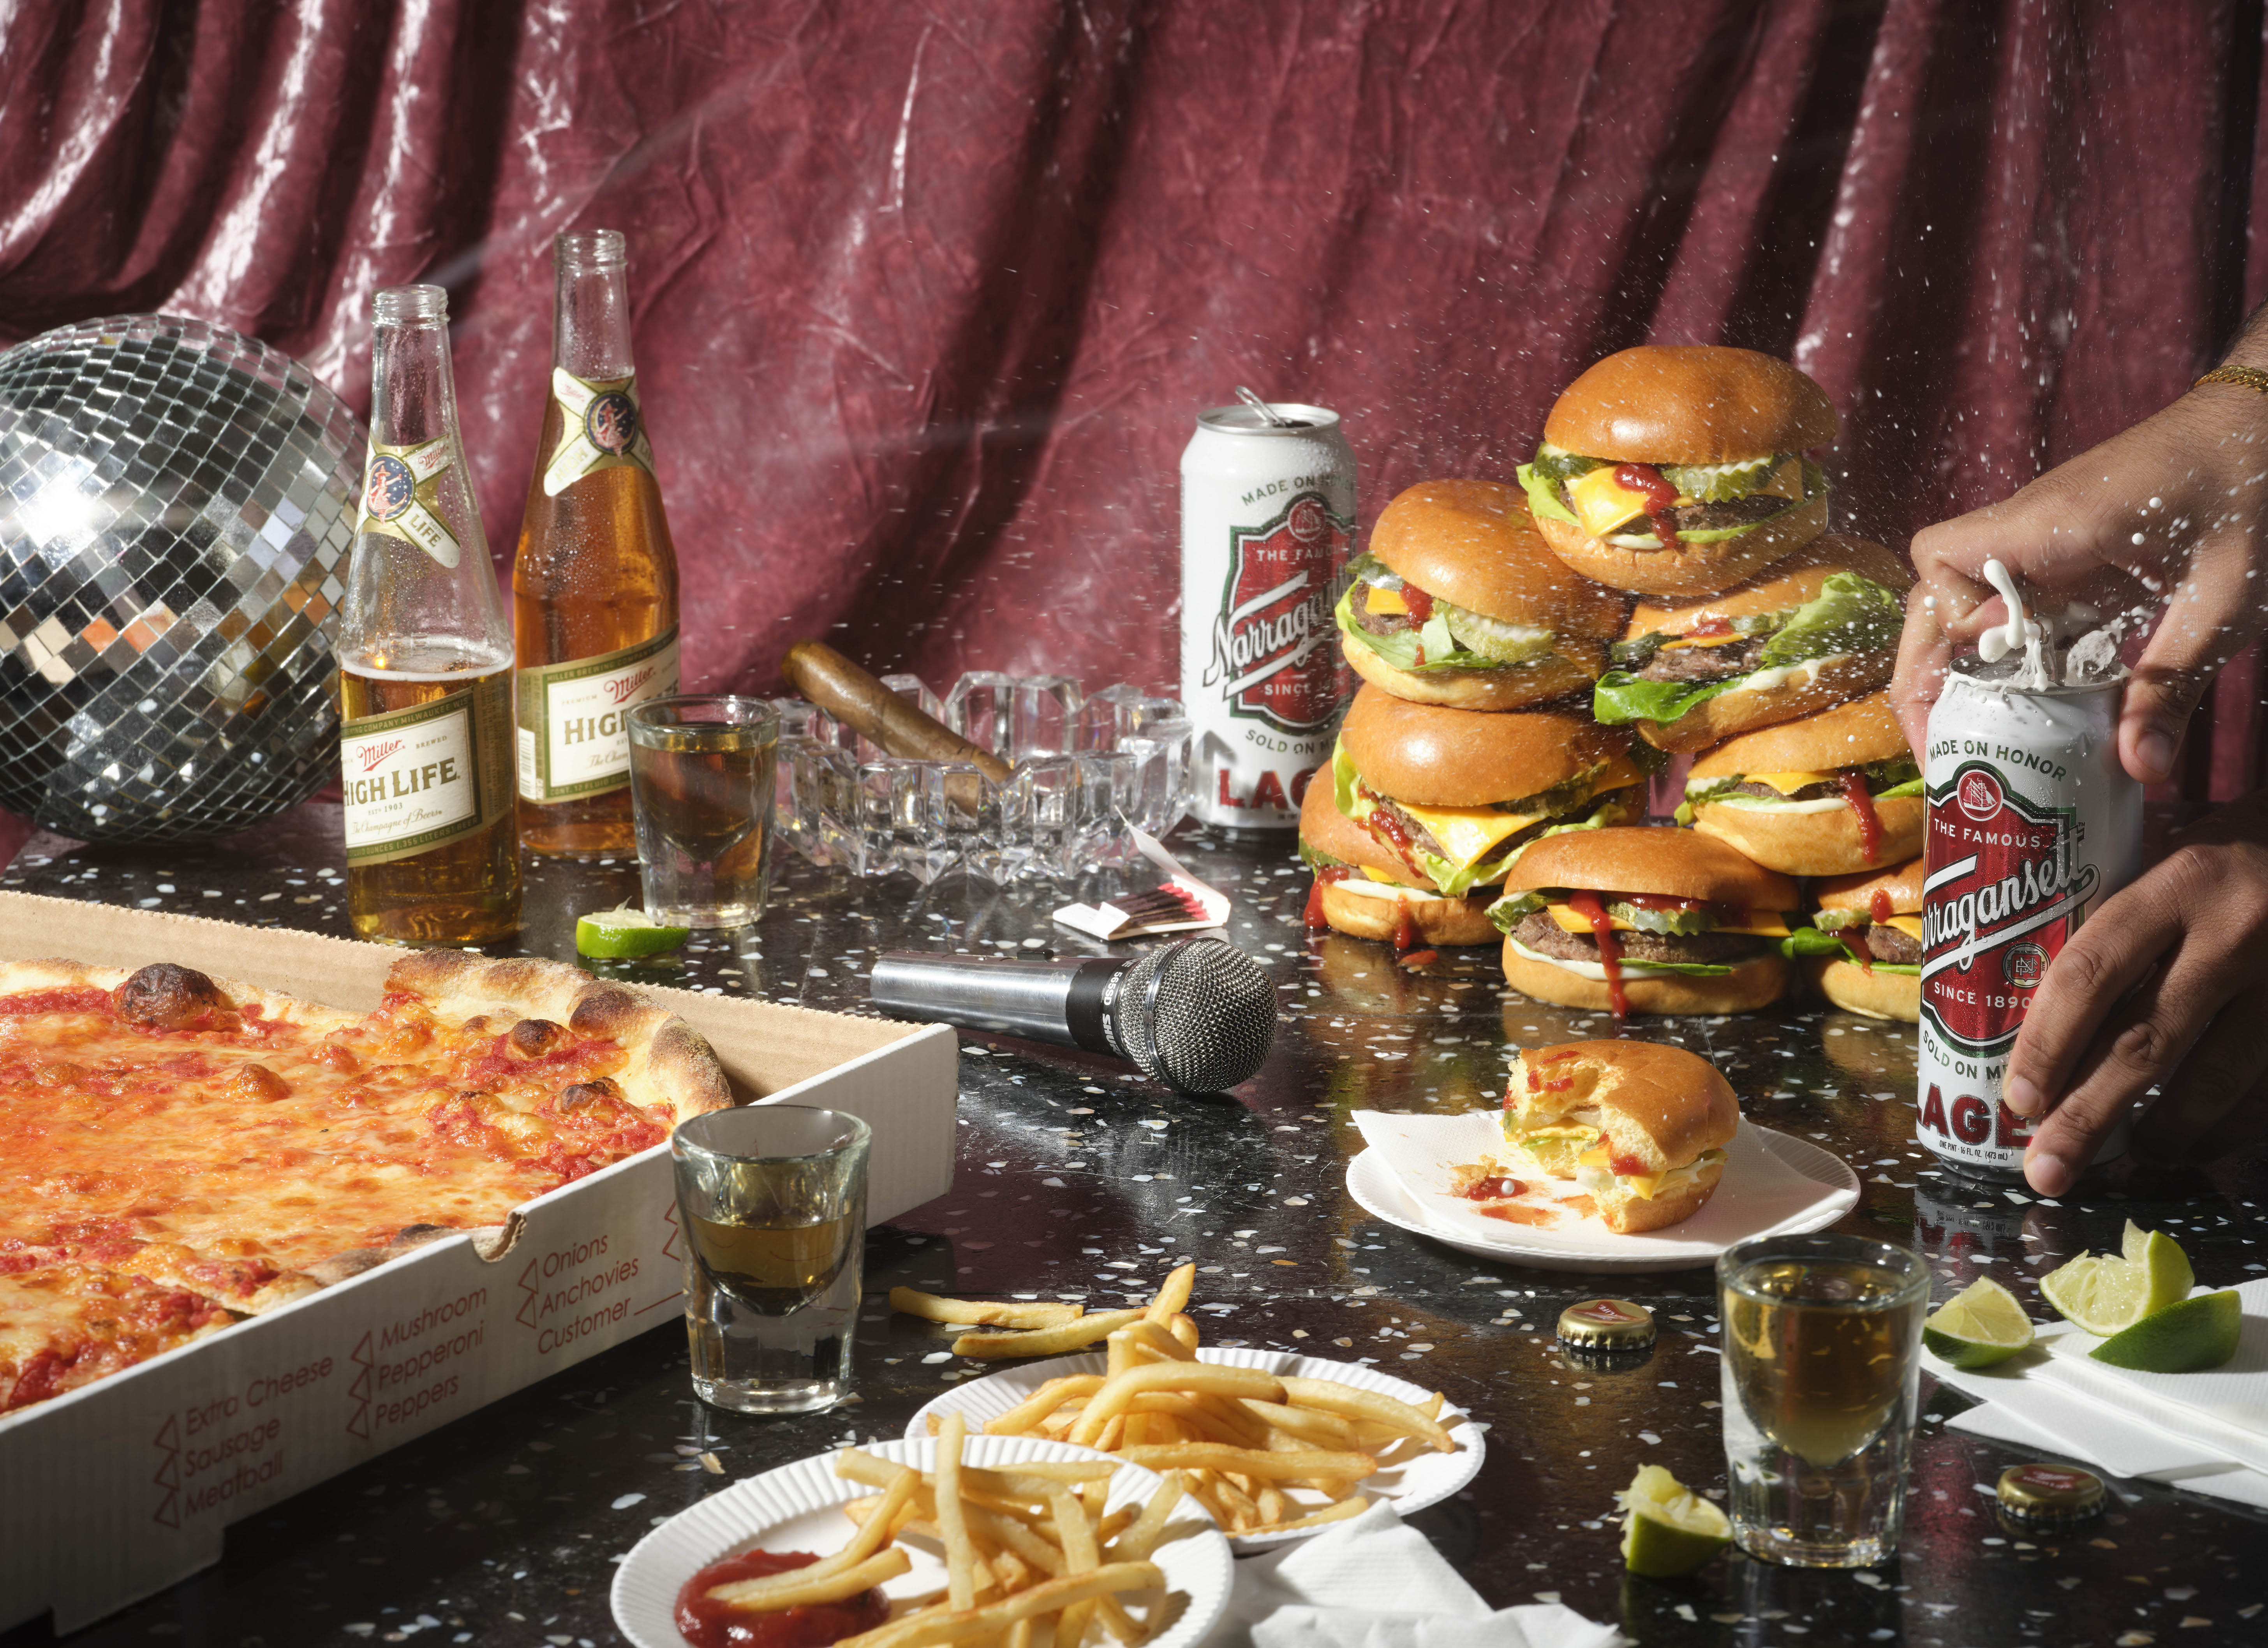 A table mid-party, with a pizza, stack of burgers, french fries, disco ball, cigar, karaoke mic, and bottles and cans of beer.